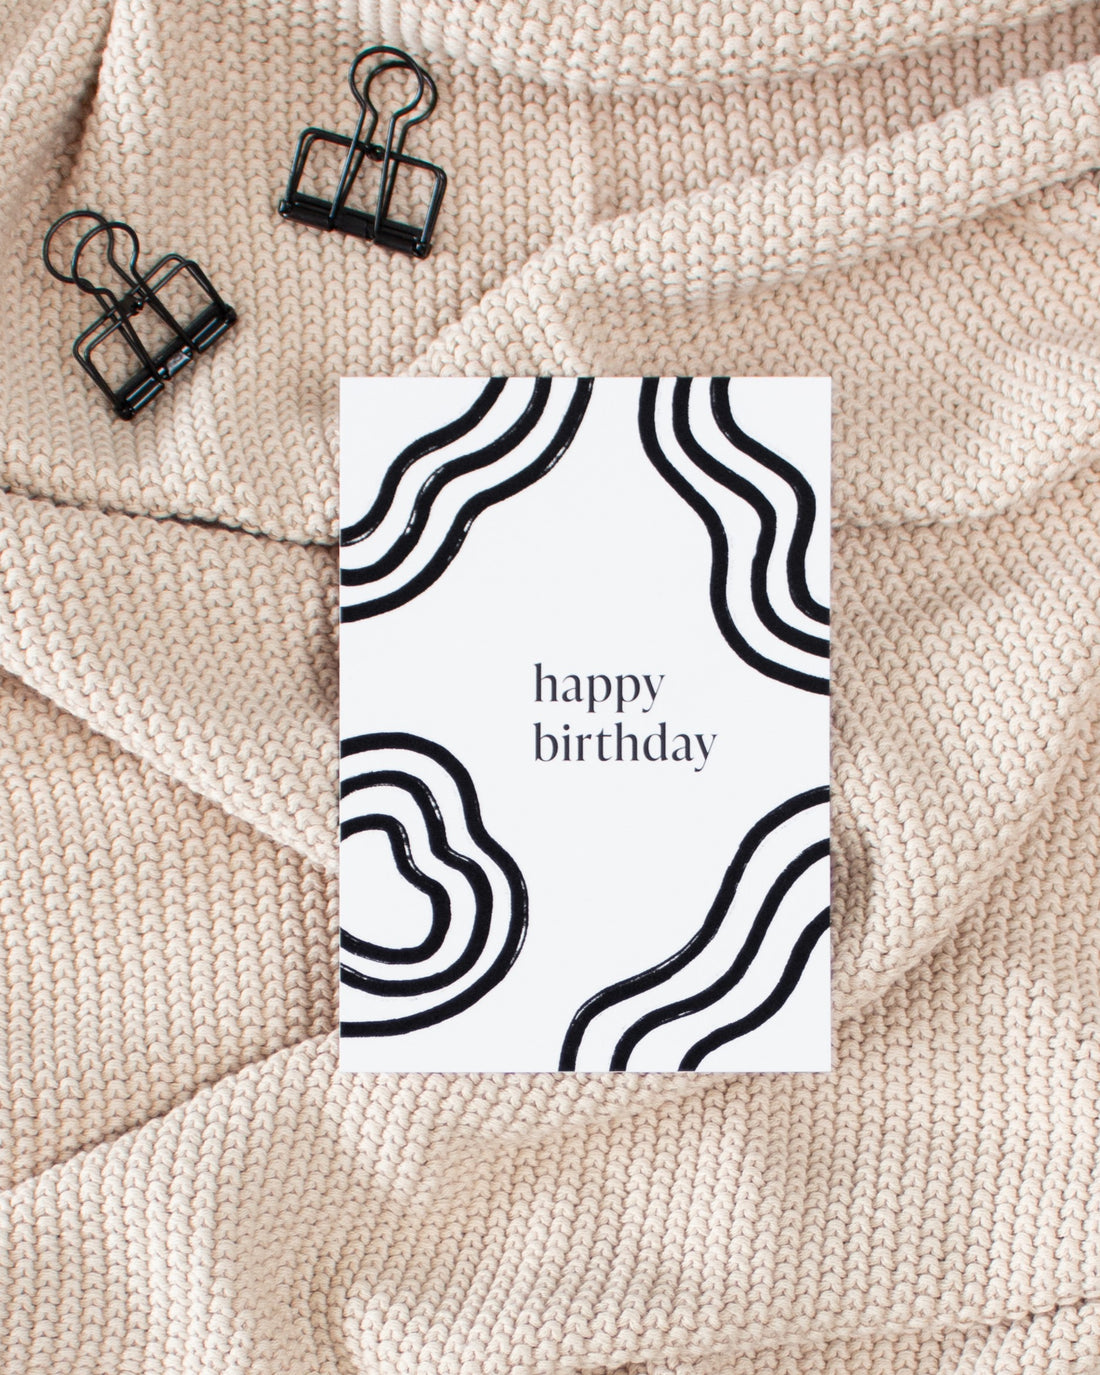 A postcard laying on a beige knitted blanket with some black binder clips. The postcard design consists of bold black wavy lines and text saying &quot;happy birthday&quot;.